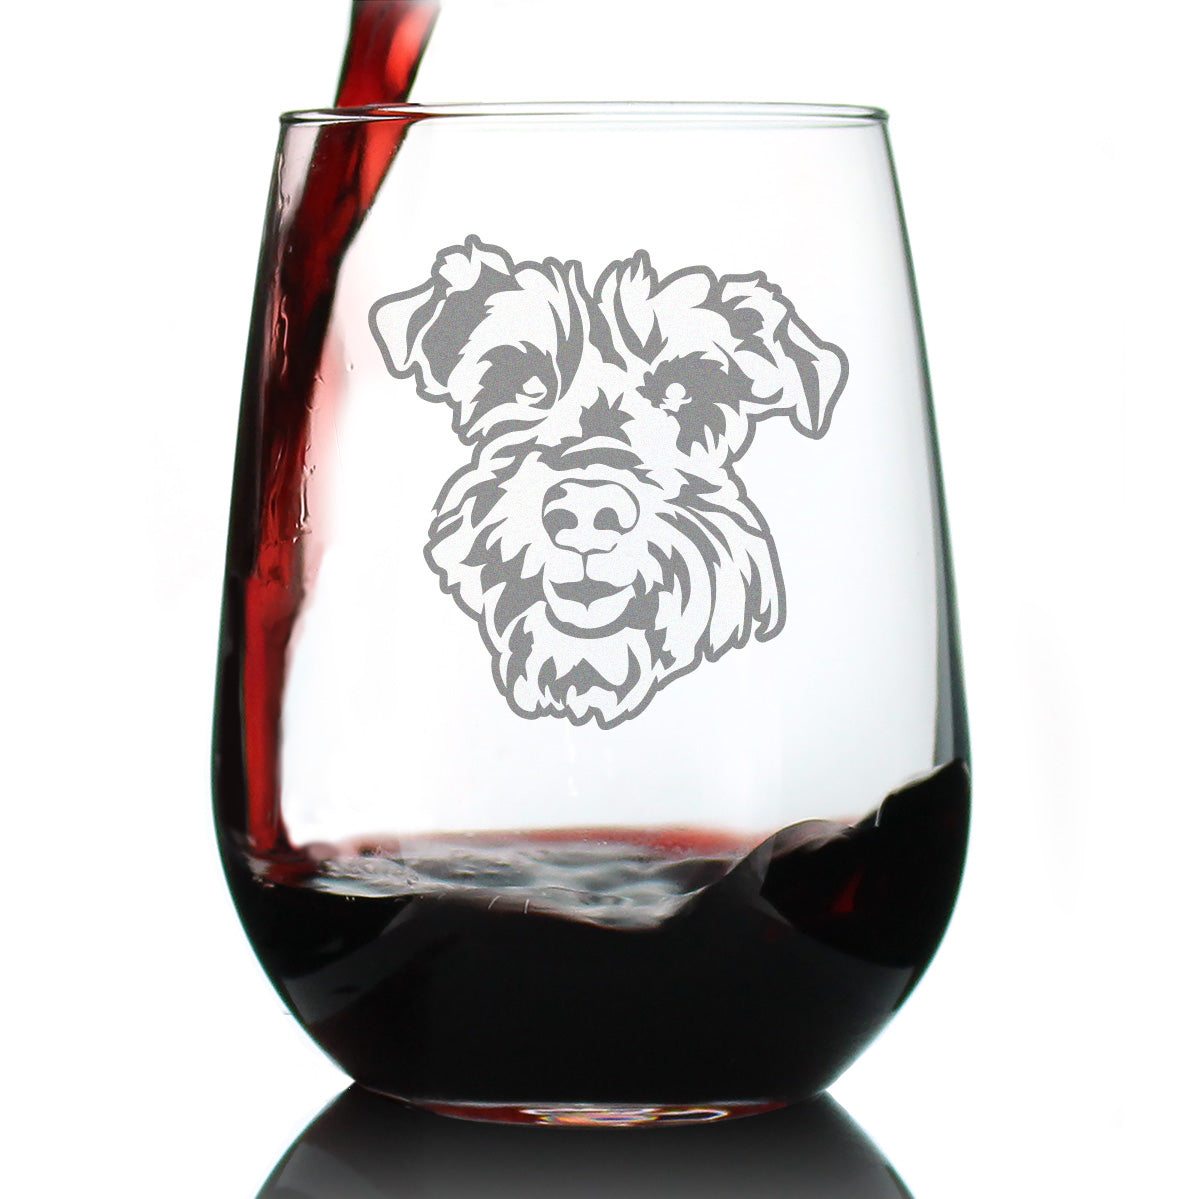 Schnauzer Face Stemless Wine Glass - Cute Dog Themed Decor and Gifts for Moms & Dads of Schnauzers - Large 17 Oz